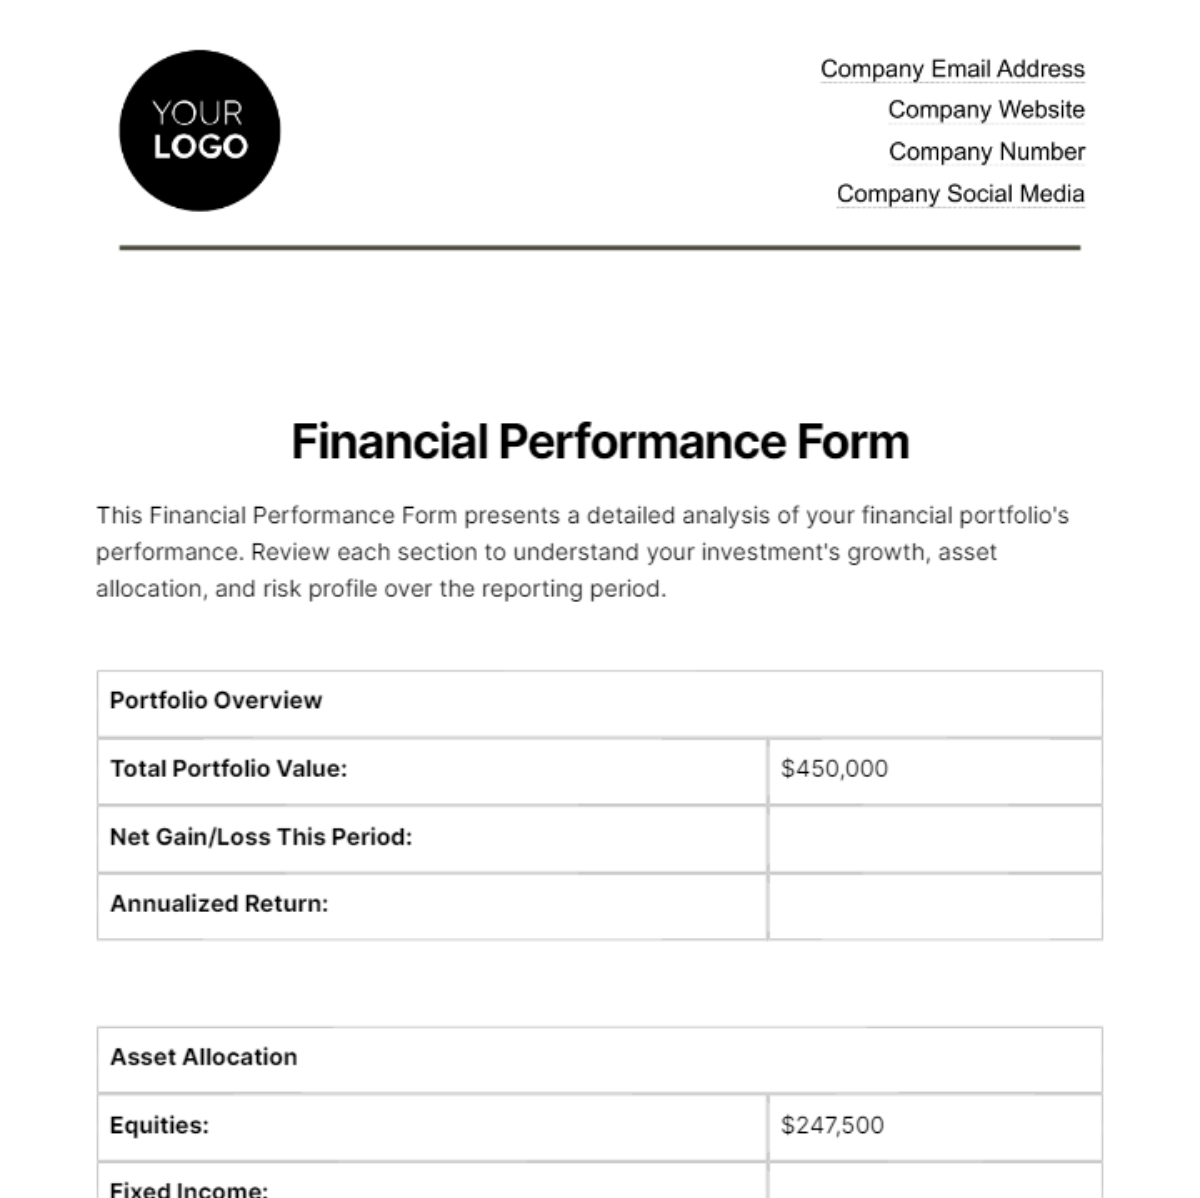 Financial Performance Form Template